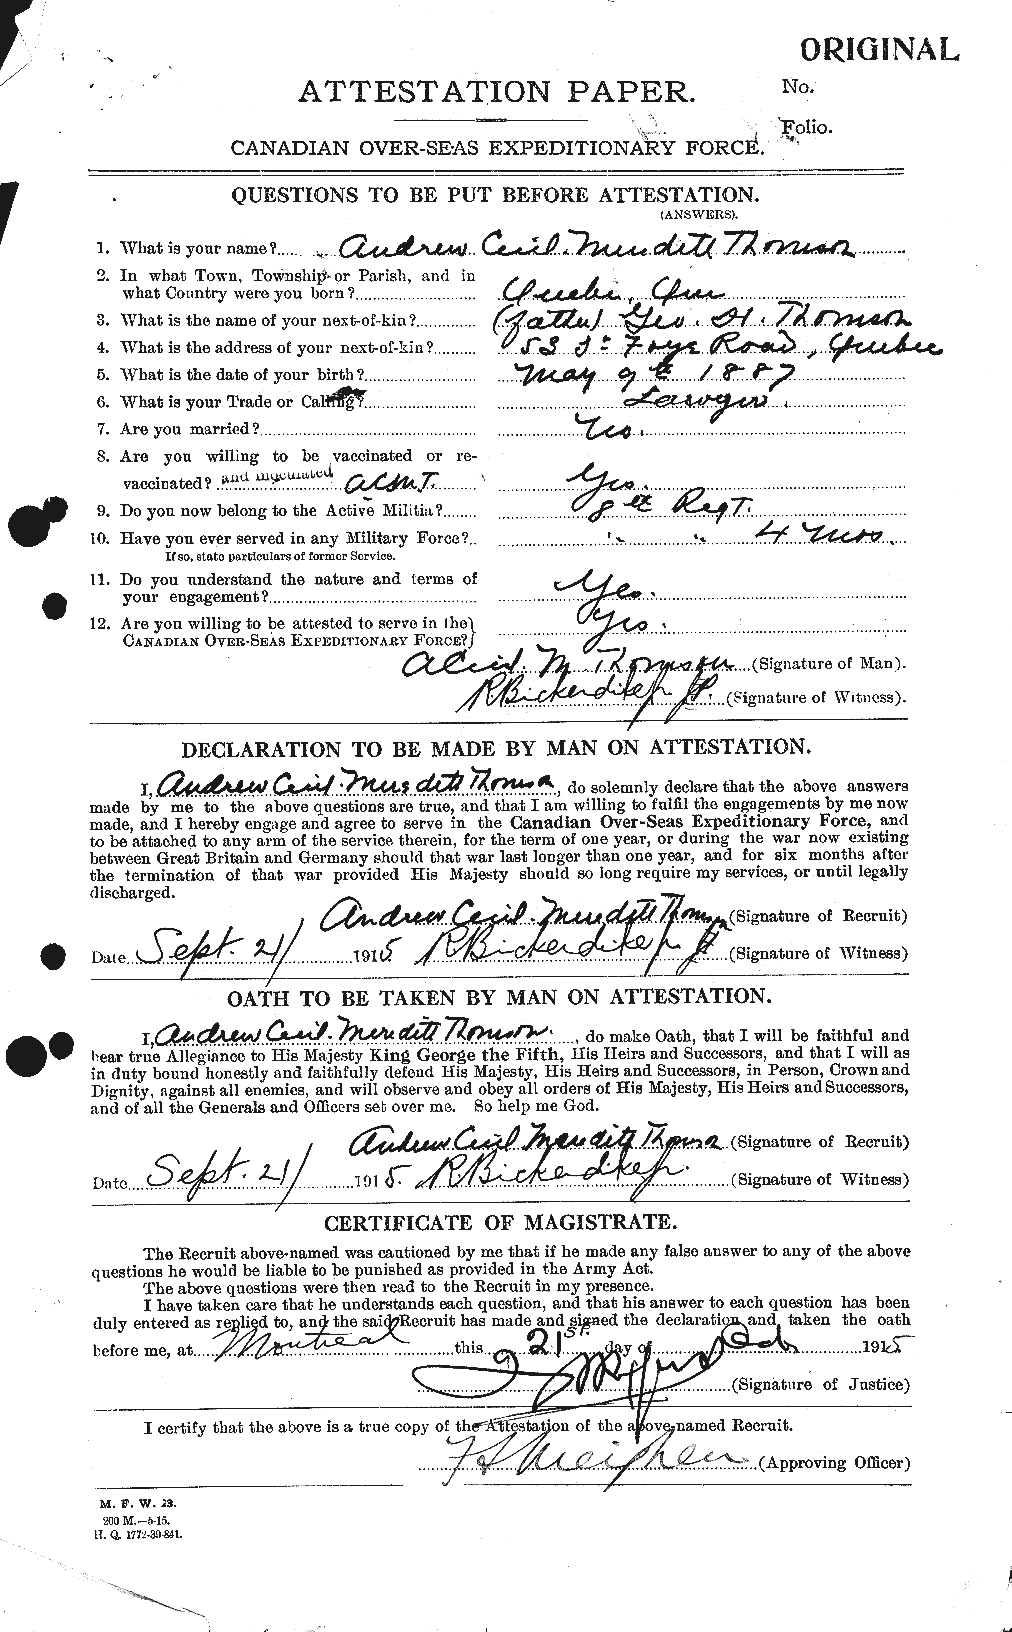 Personnel Records of the First World War - CEF 632253a